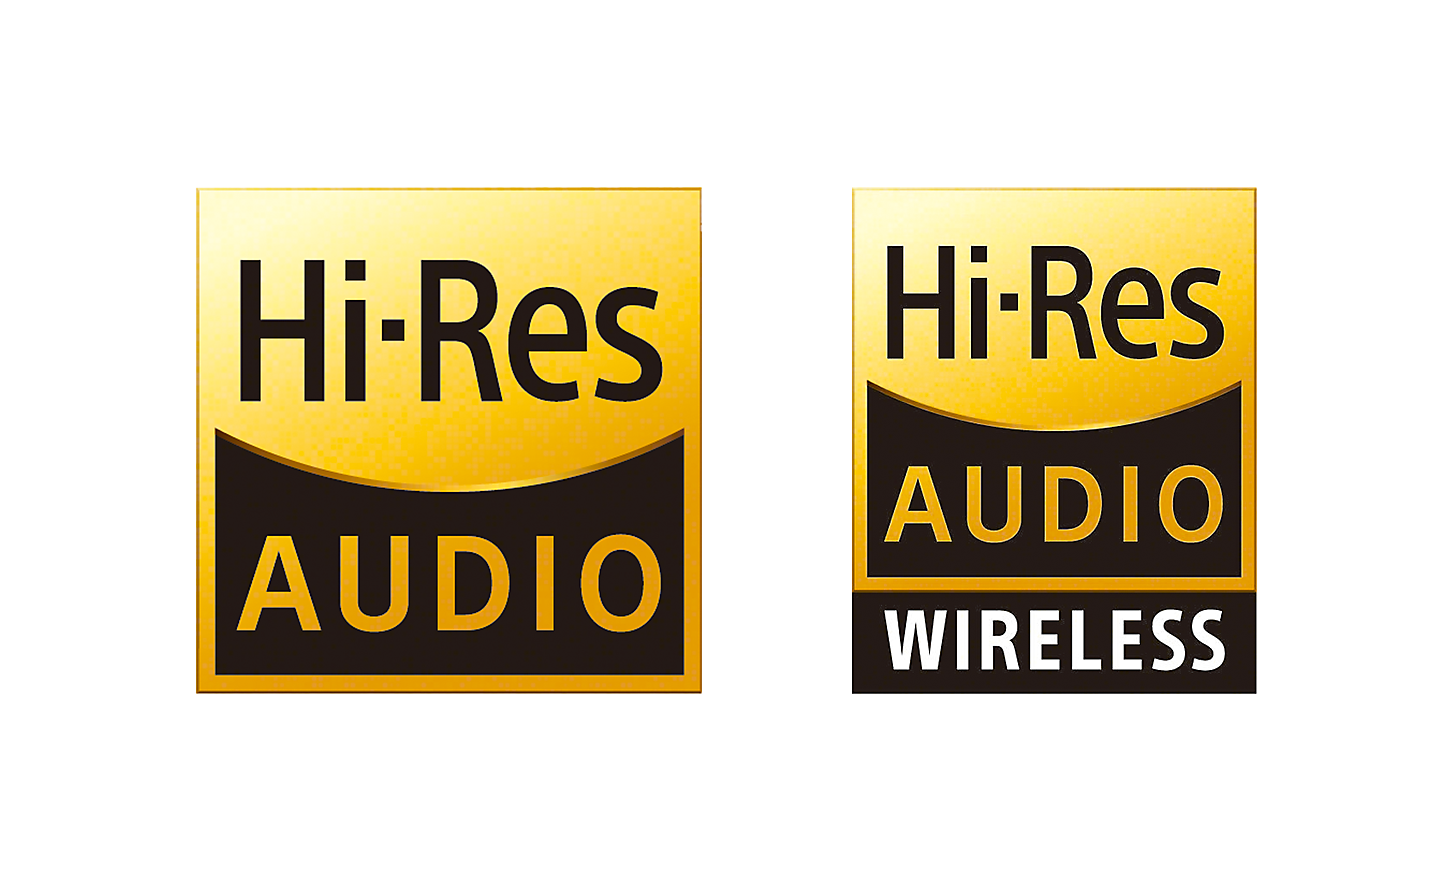 Logos for Hi-Res Audio and Hi-Res Audio Wireless